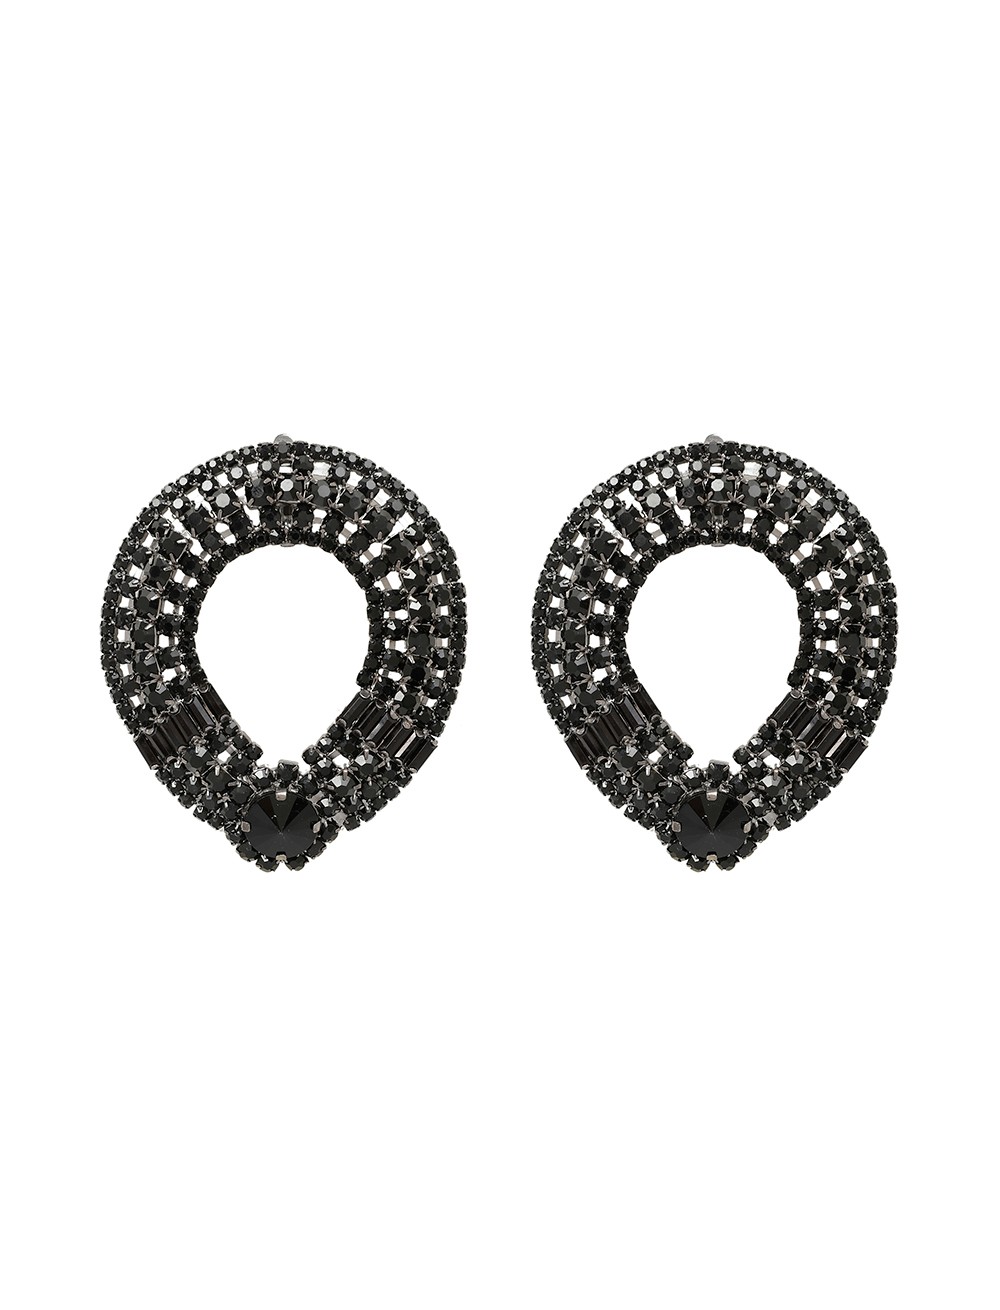 Anthracite Oval Earrings With Black Crystals